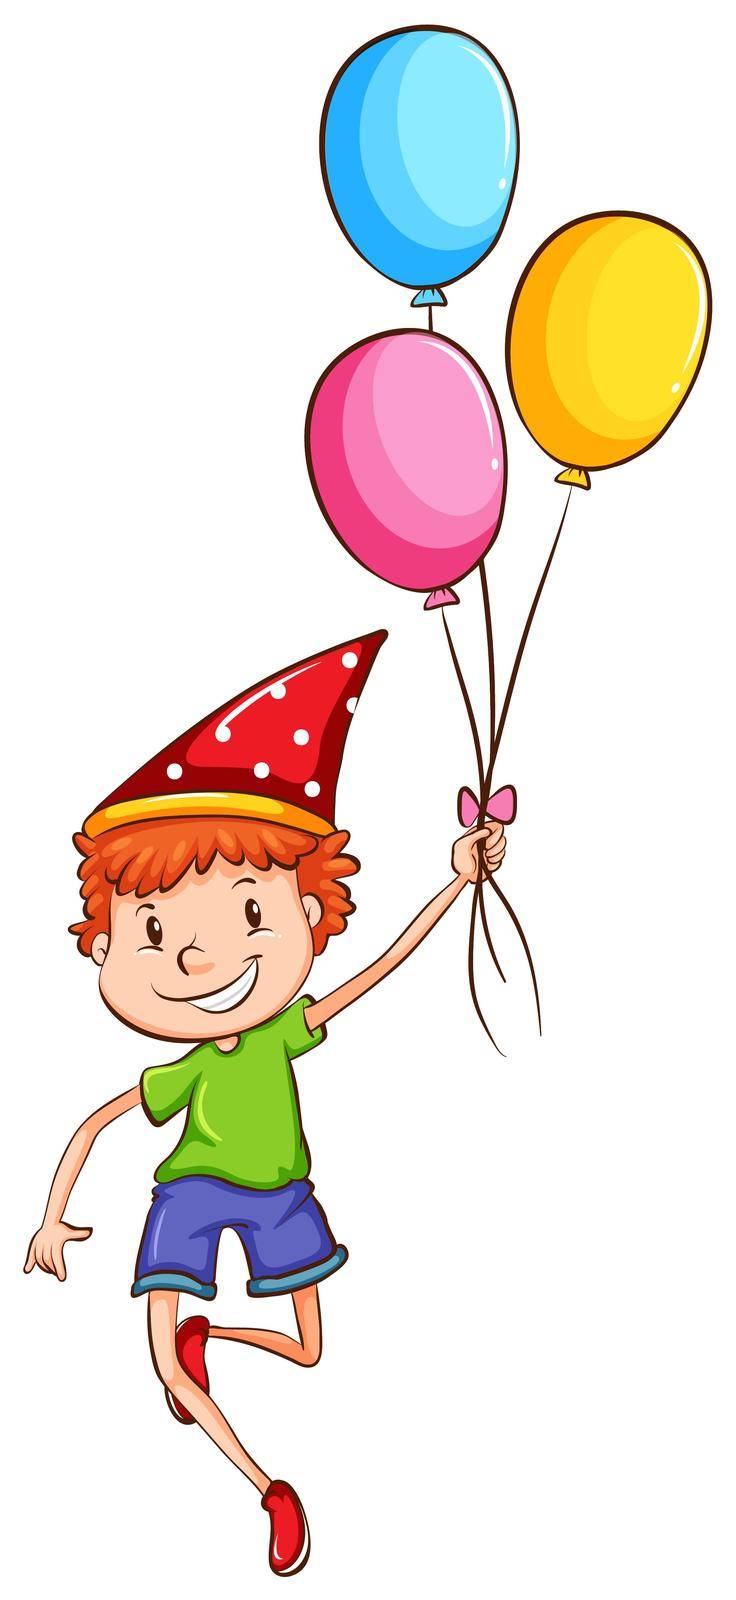 A happy kid with balloons by iimages